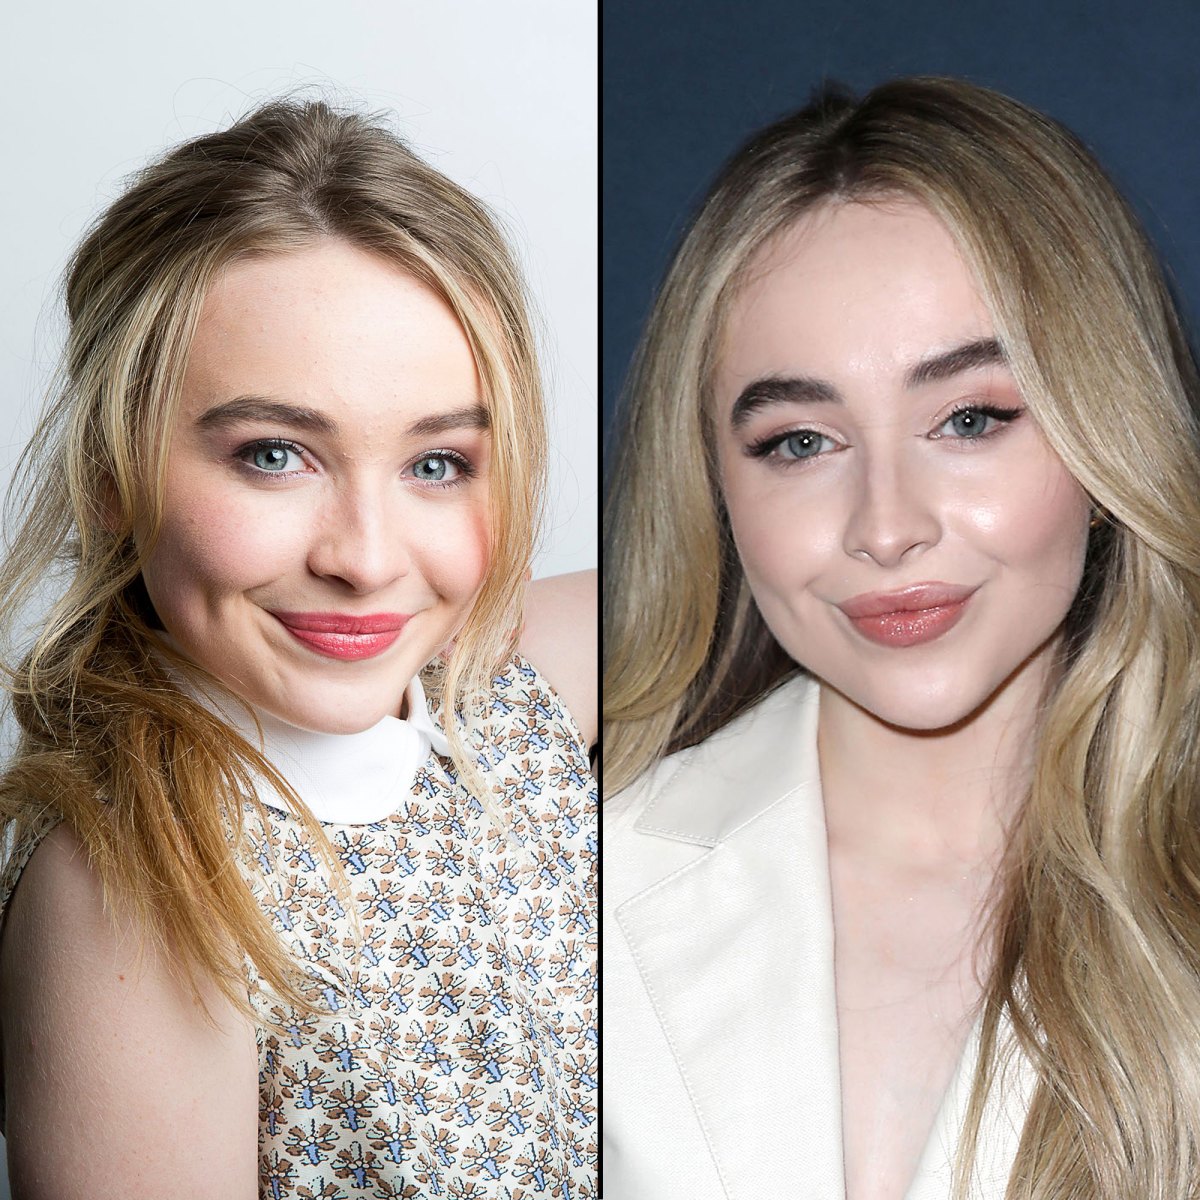 https://www.lifeandstylemag.com/wp-content/uploads/2021/04/Sabrina-Carpenter-Favorite-Disney-Channel-Stars-Then-and-Now.jpg?resize=1200%2C1200&quality=86&strip=all